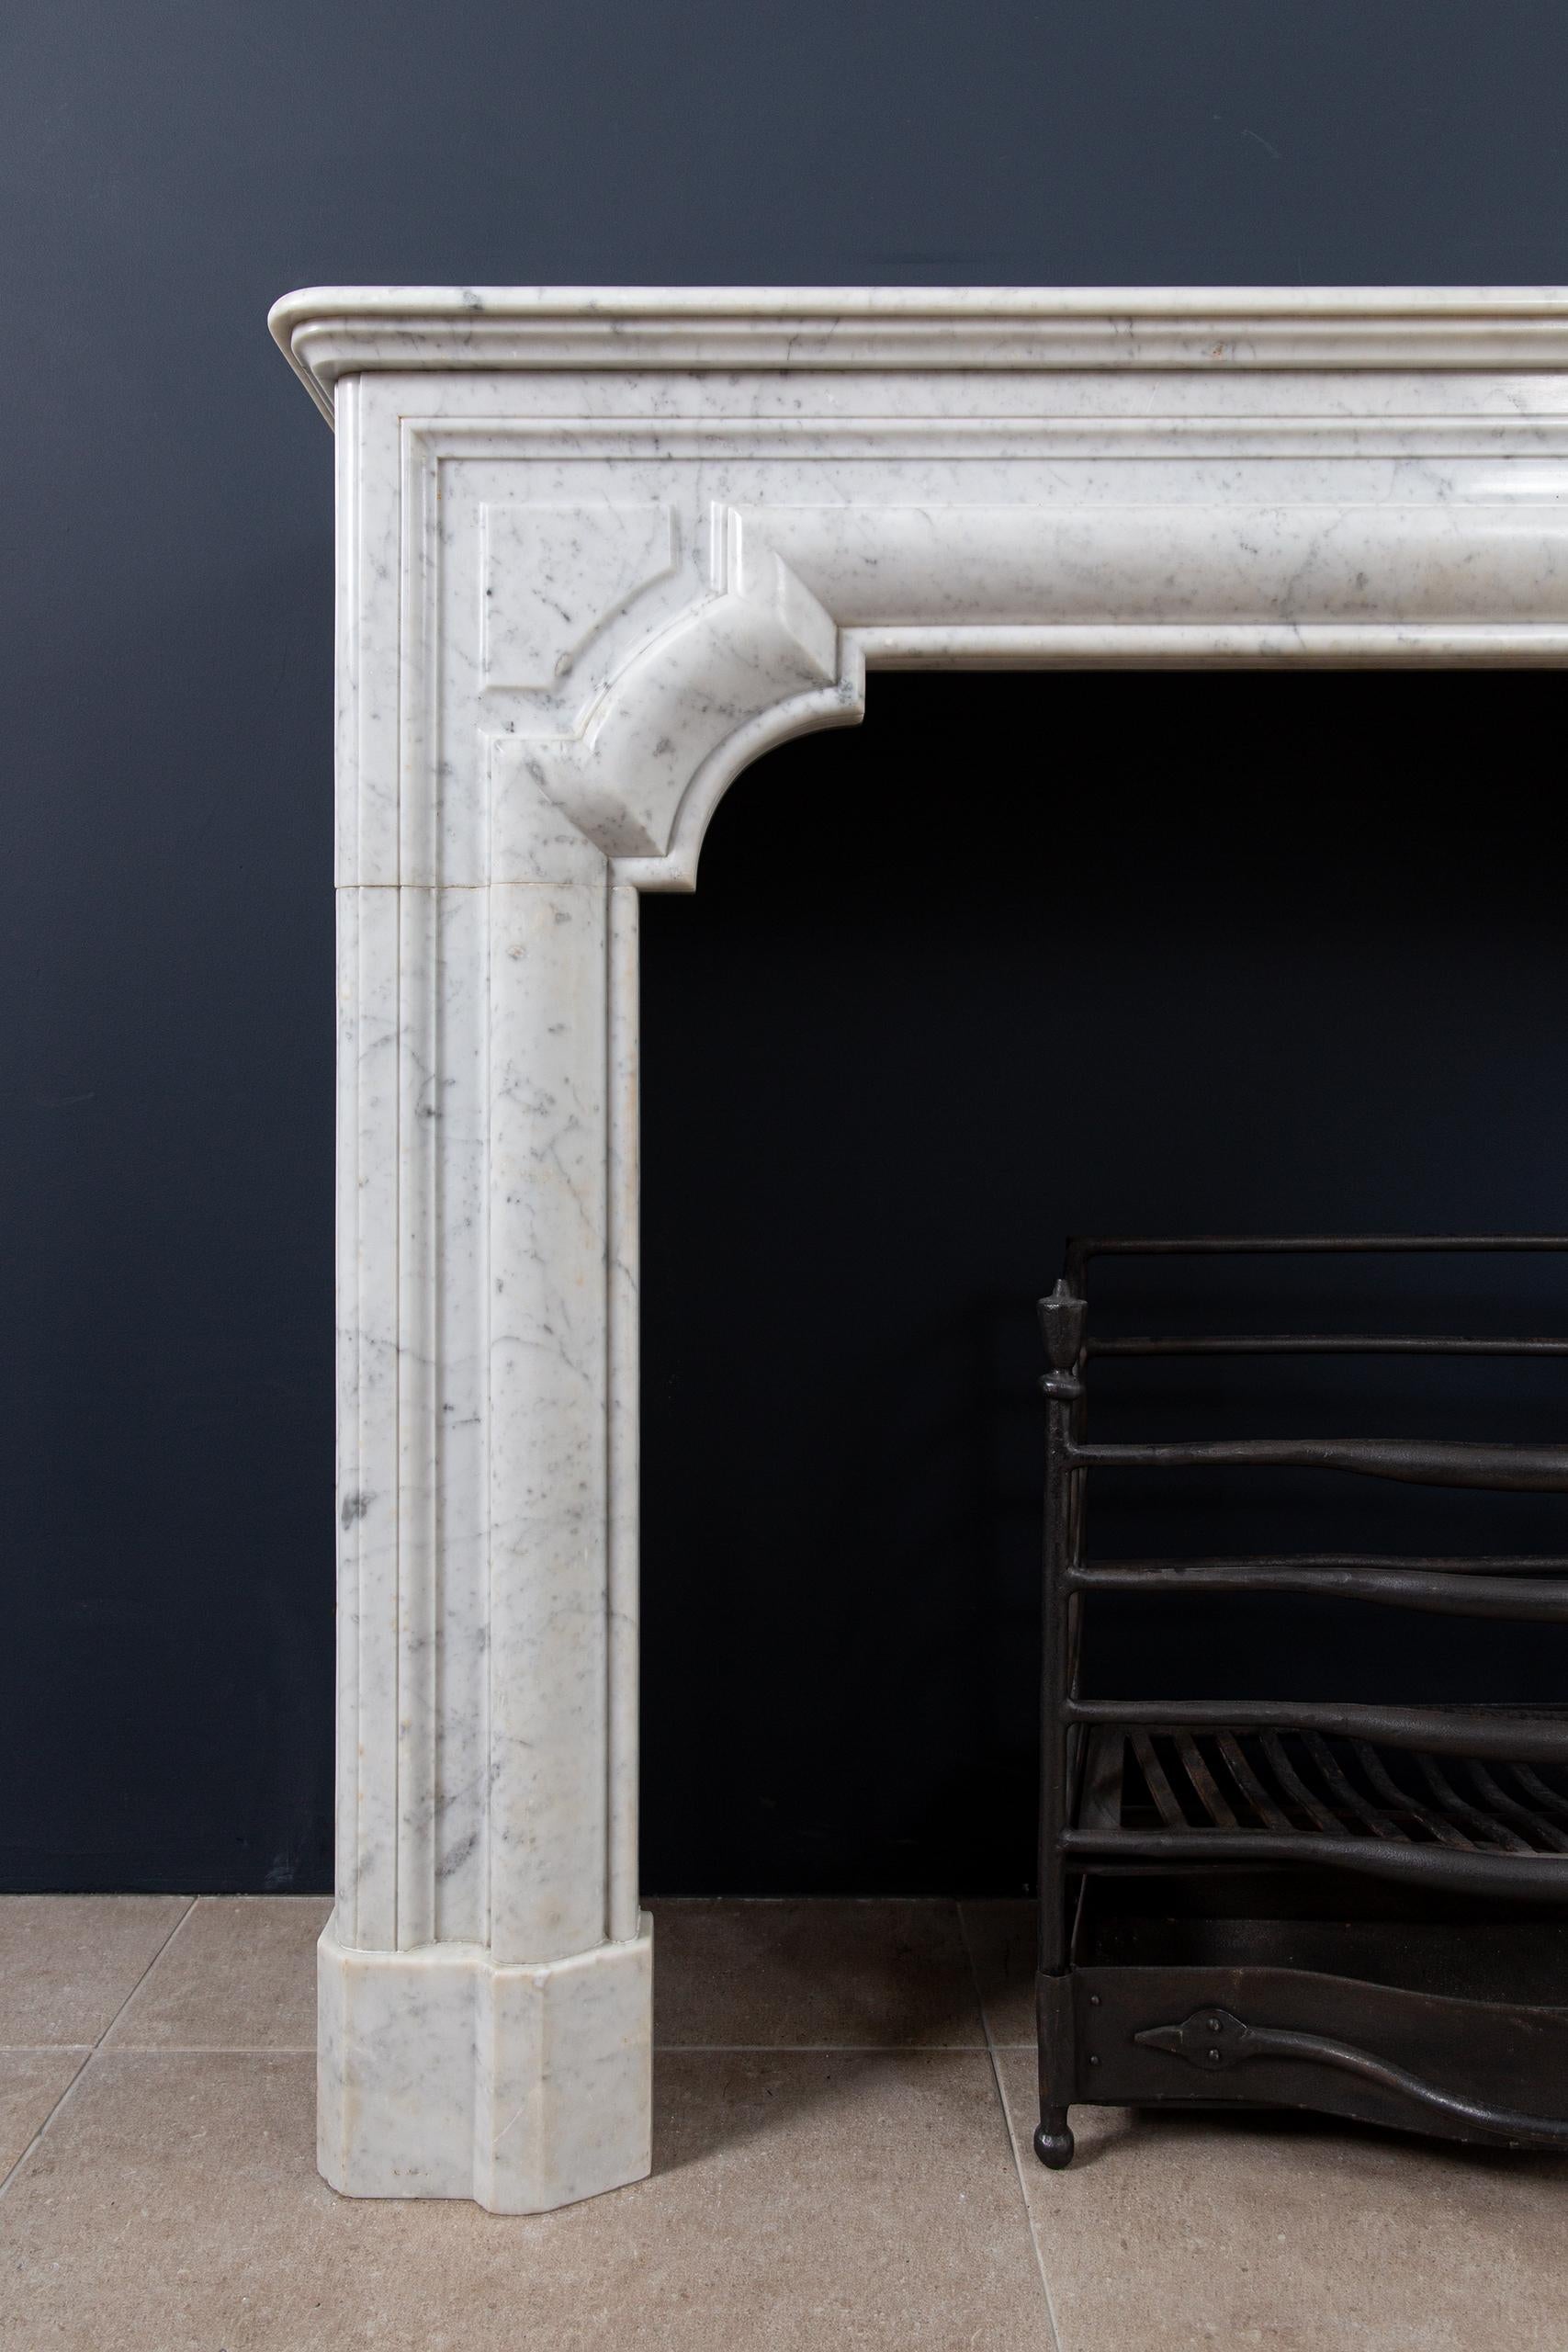 A beautiful French Antique Bolection style fireplace in Carrara Marble. This style of fireplaces is characterized by the round, continuous milling edge. This continues from the consoles into the front. The thickness of the marble gives this